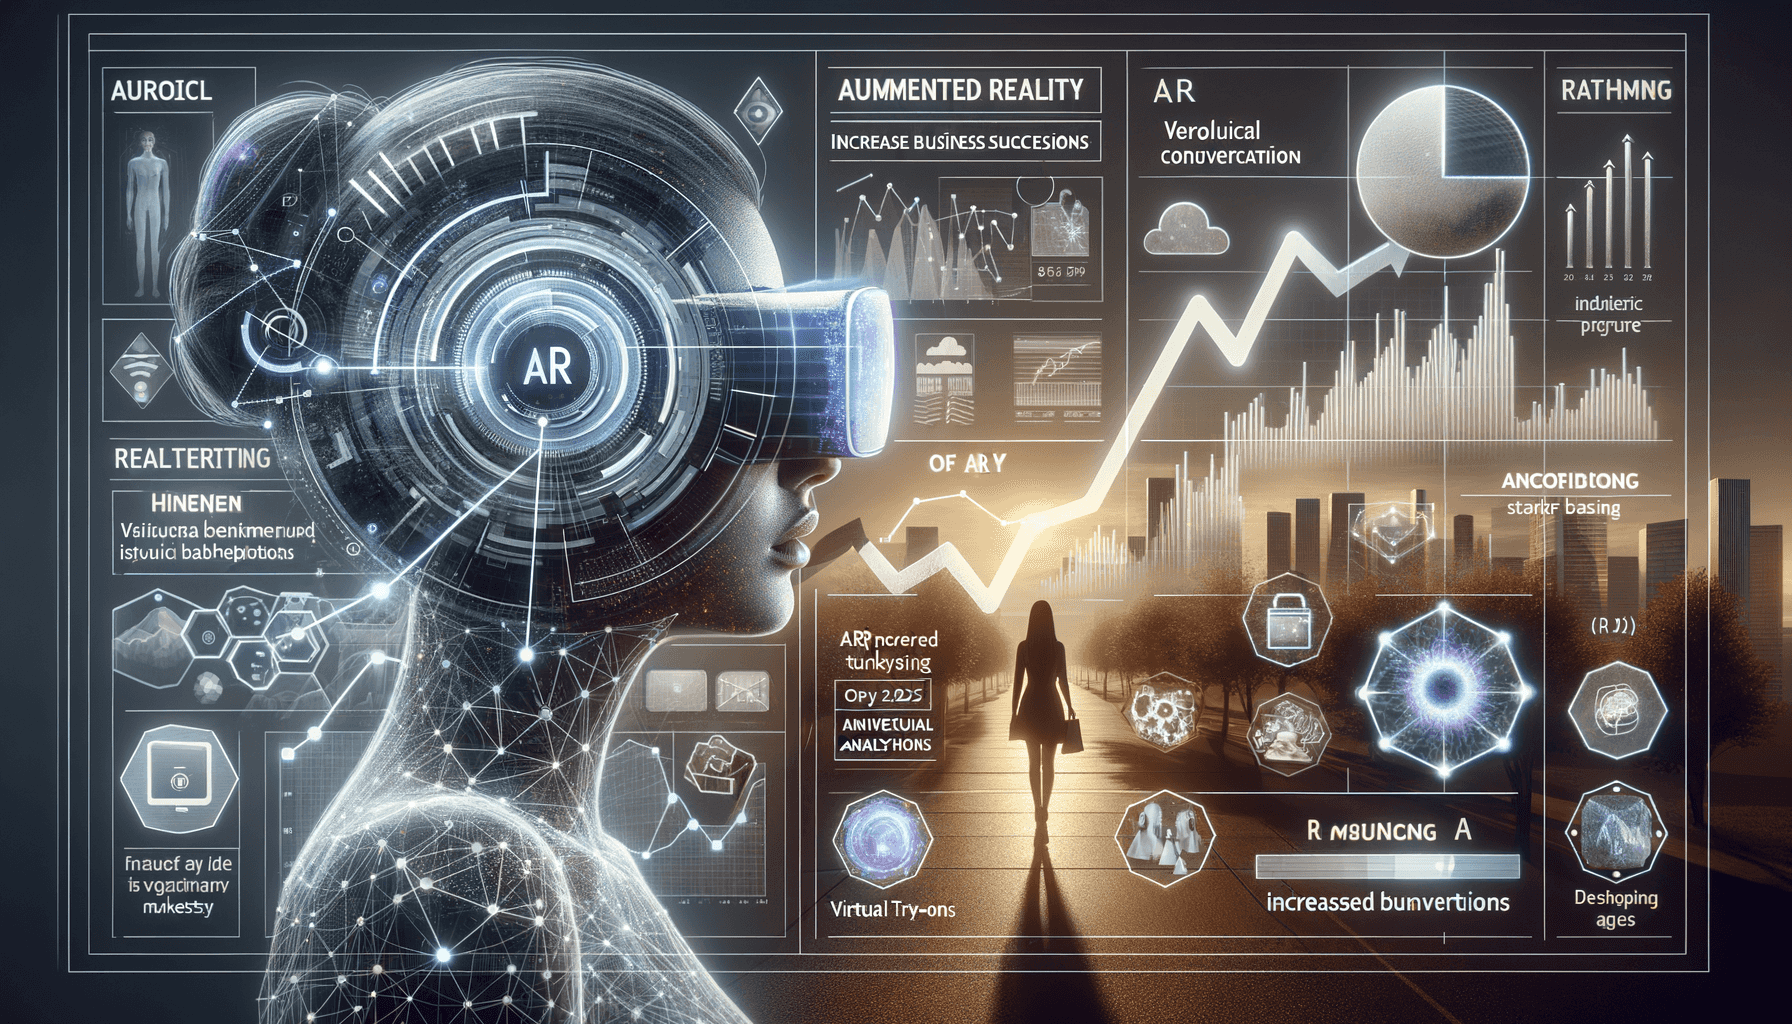 "Explore the Future of Marketing with Augmented Reality: Discover Gravity Jack's Innovative AR Solutions for Enhanced User Engagement and Real-Time Analytics. #ARmarketing #GravityJack #UserExperience #RealTimeData #ConversionBoosting #RetailInnovation"